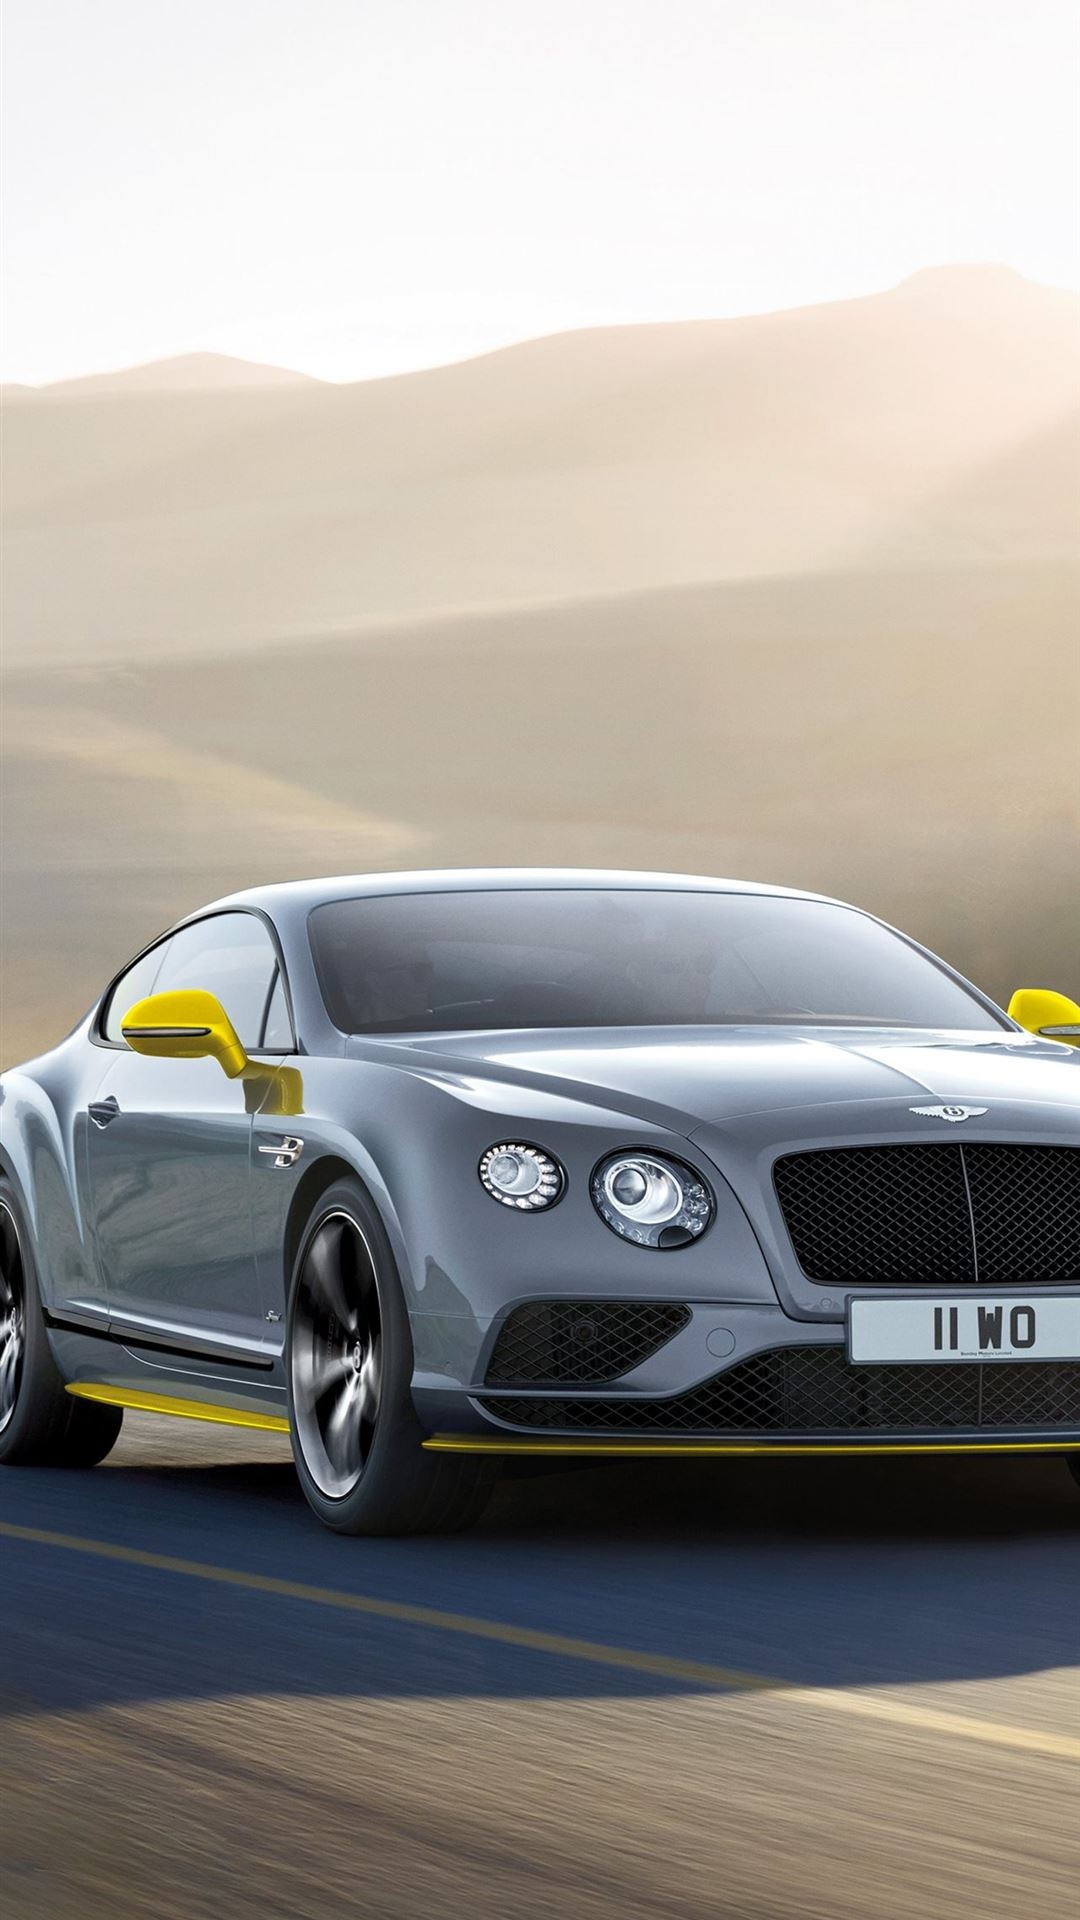 Bentley Continental, GT Speed iPhone wallpapers, Auto, Free download, 1080x1920 Full HD Handy